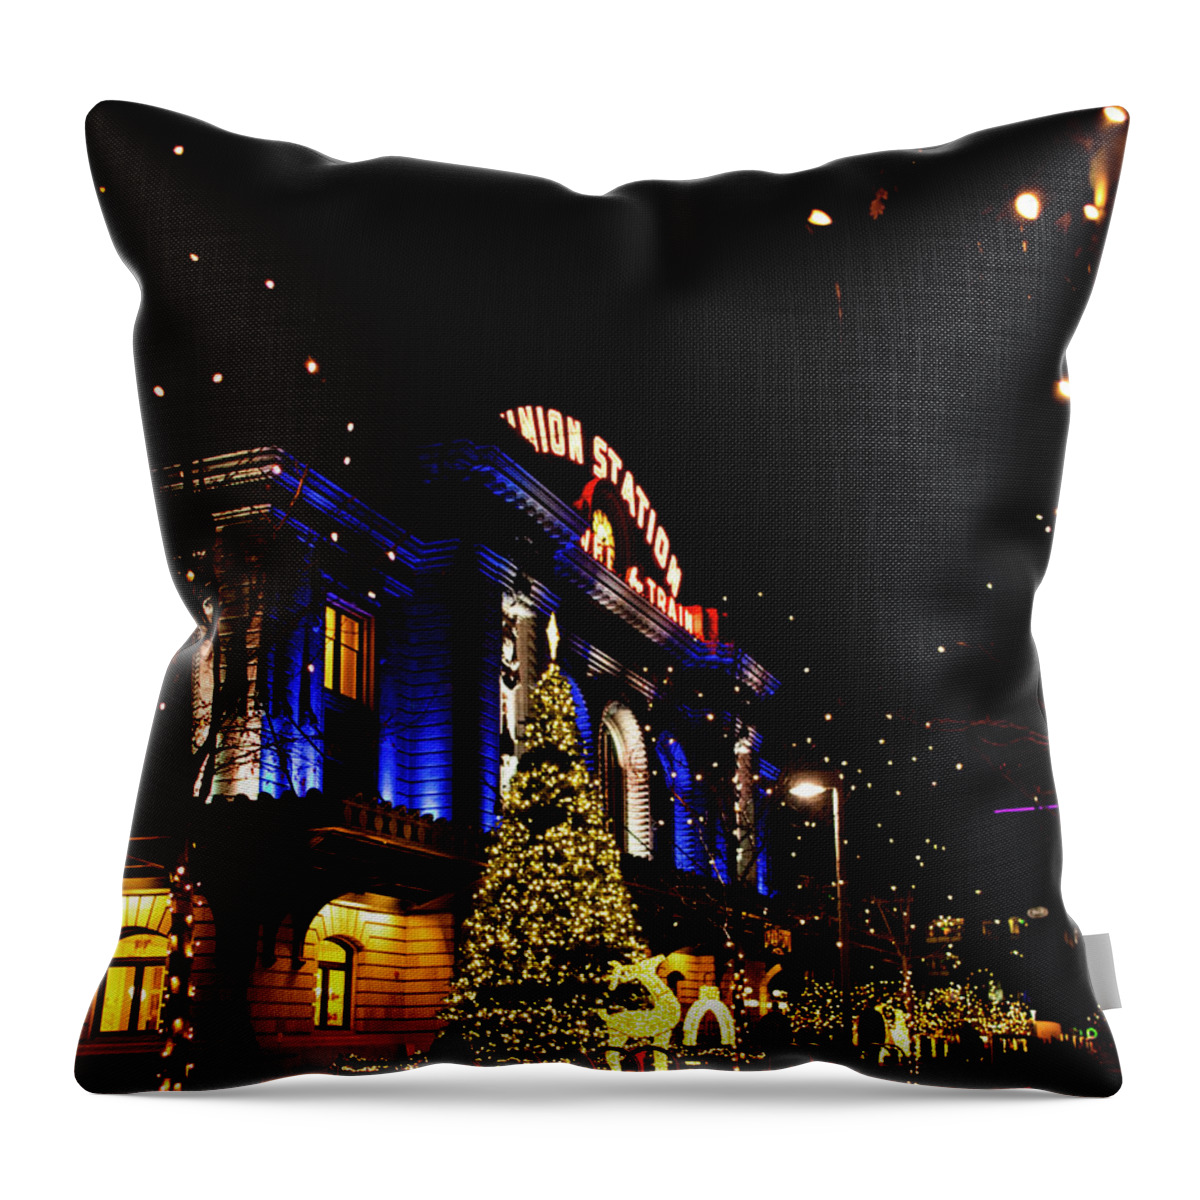 Denver Union Station Throw Pillow featuring the photograph Holidays at Union Station by Kevin Schwalbe